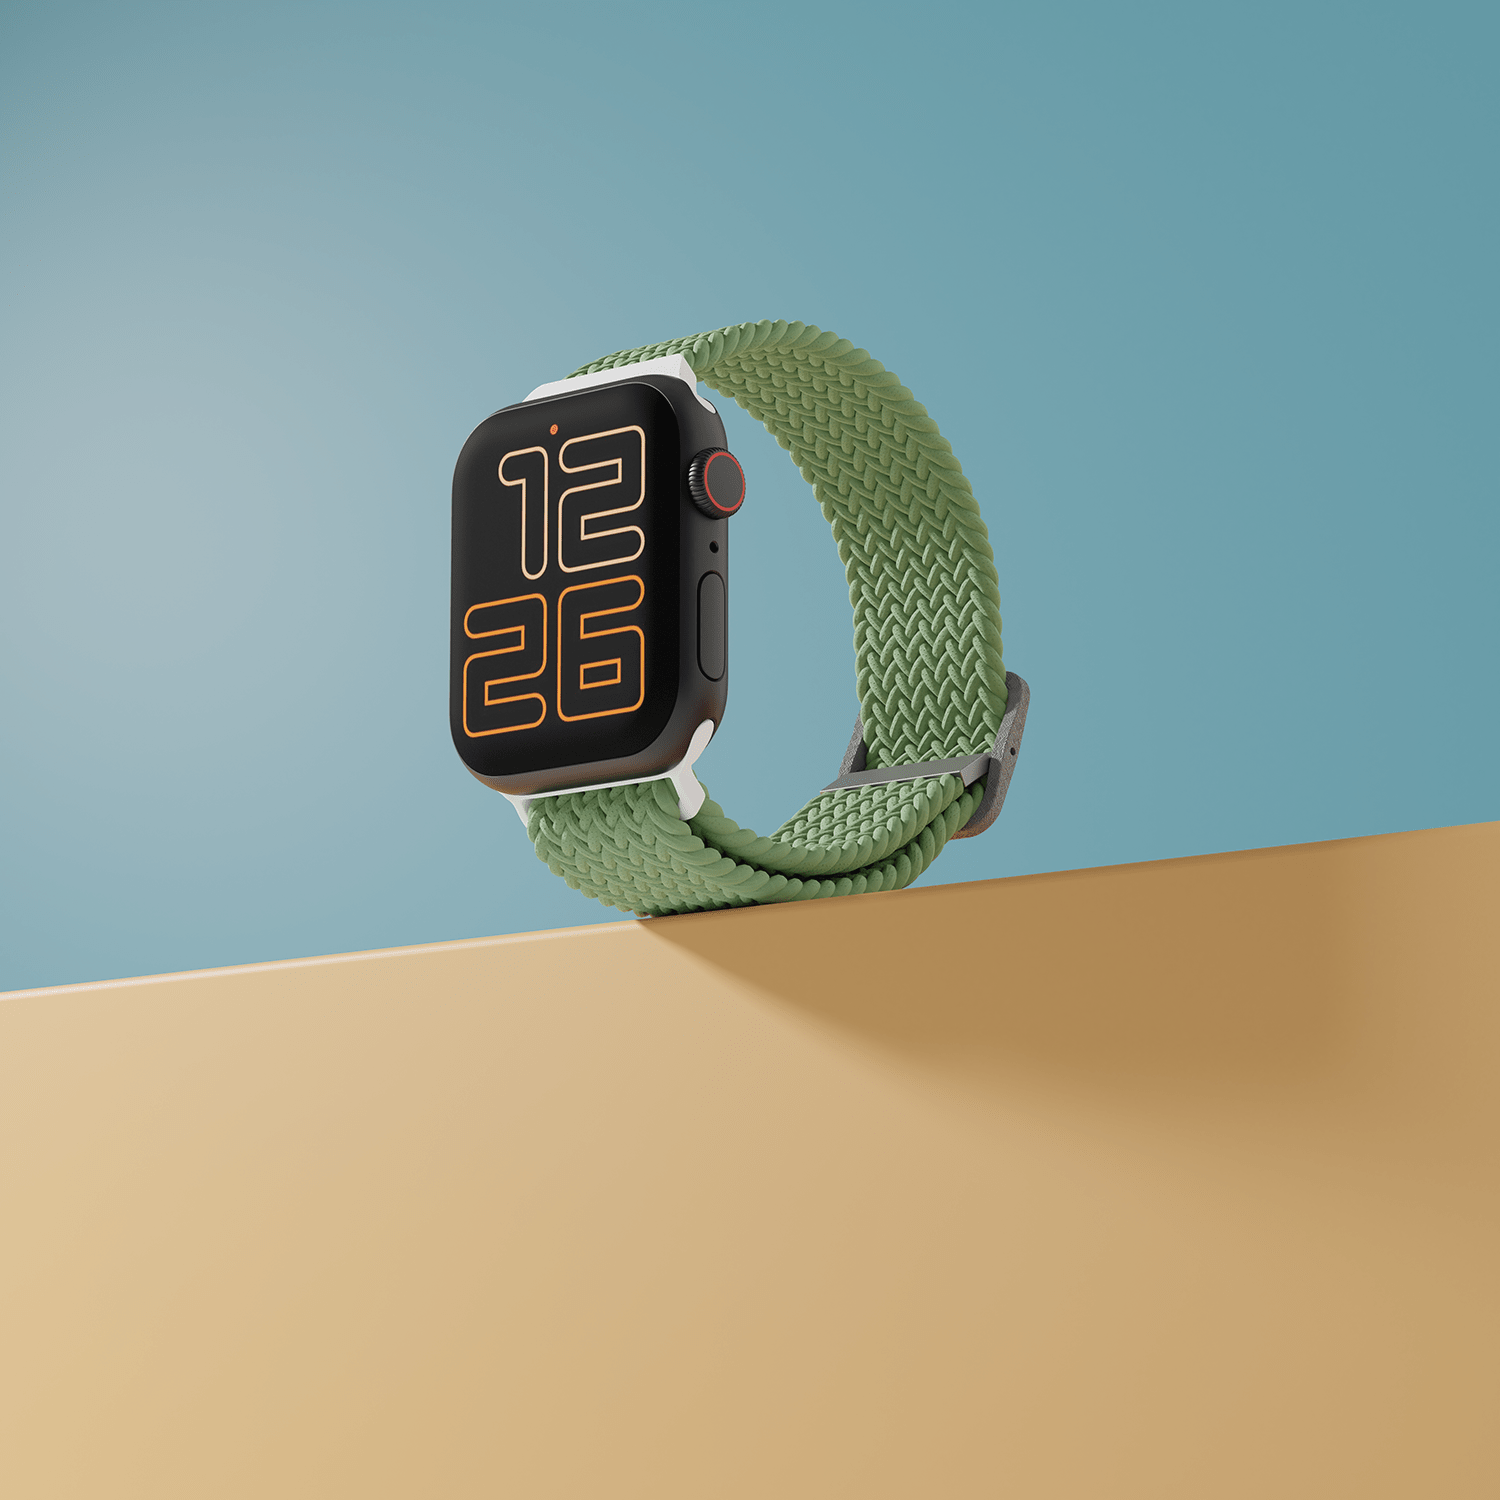 Smartwatch with green braided band on dual-tone background.